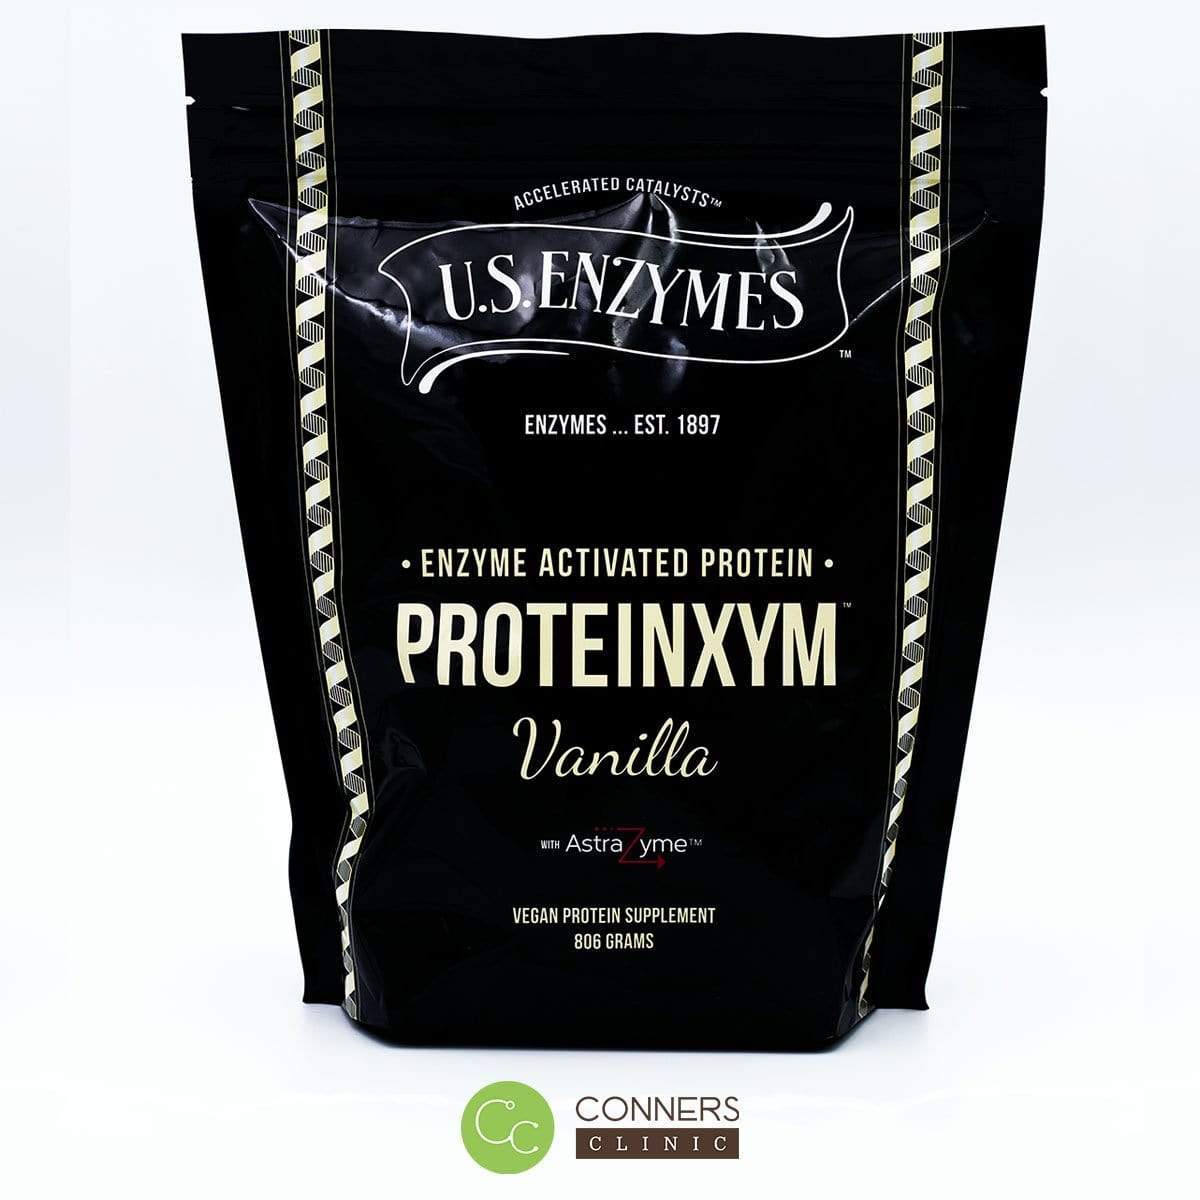 Proteinxym Vanilla U.S. Enzymes Supplement - Conners Clinic